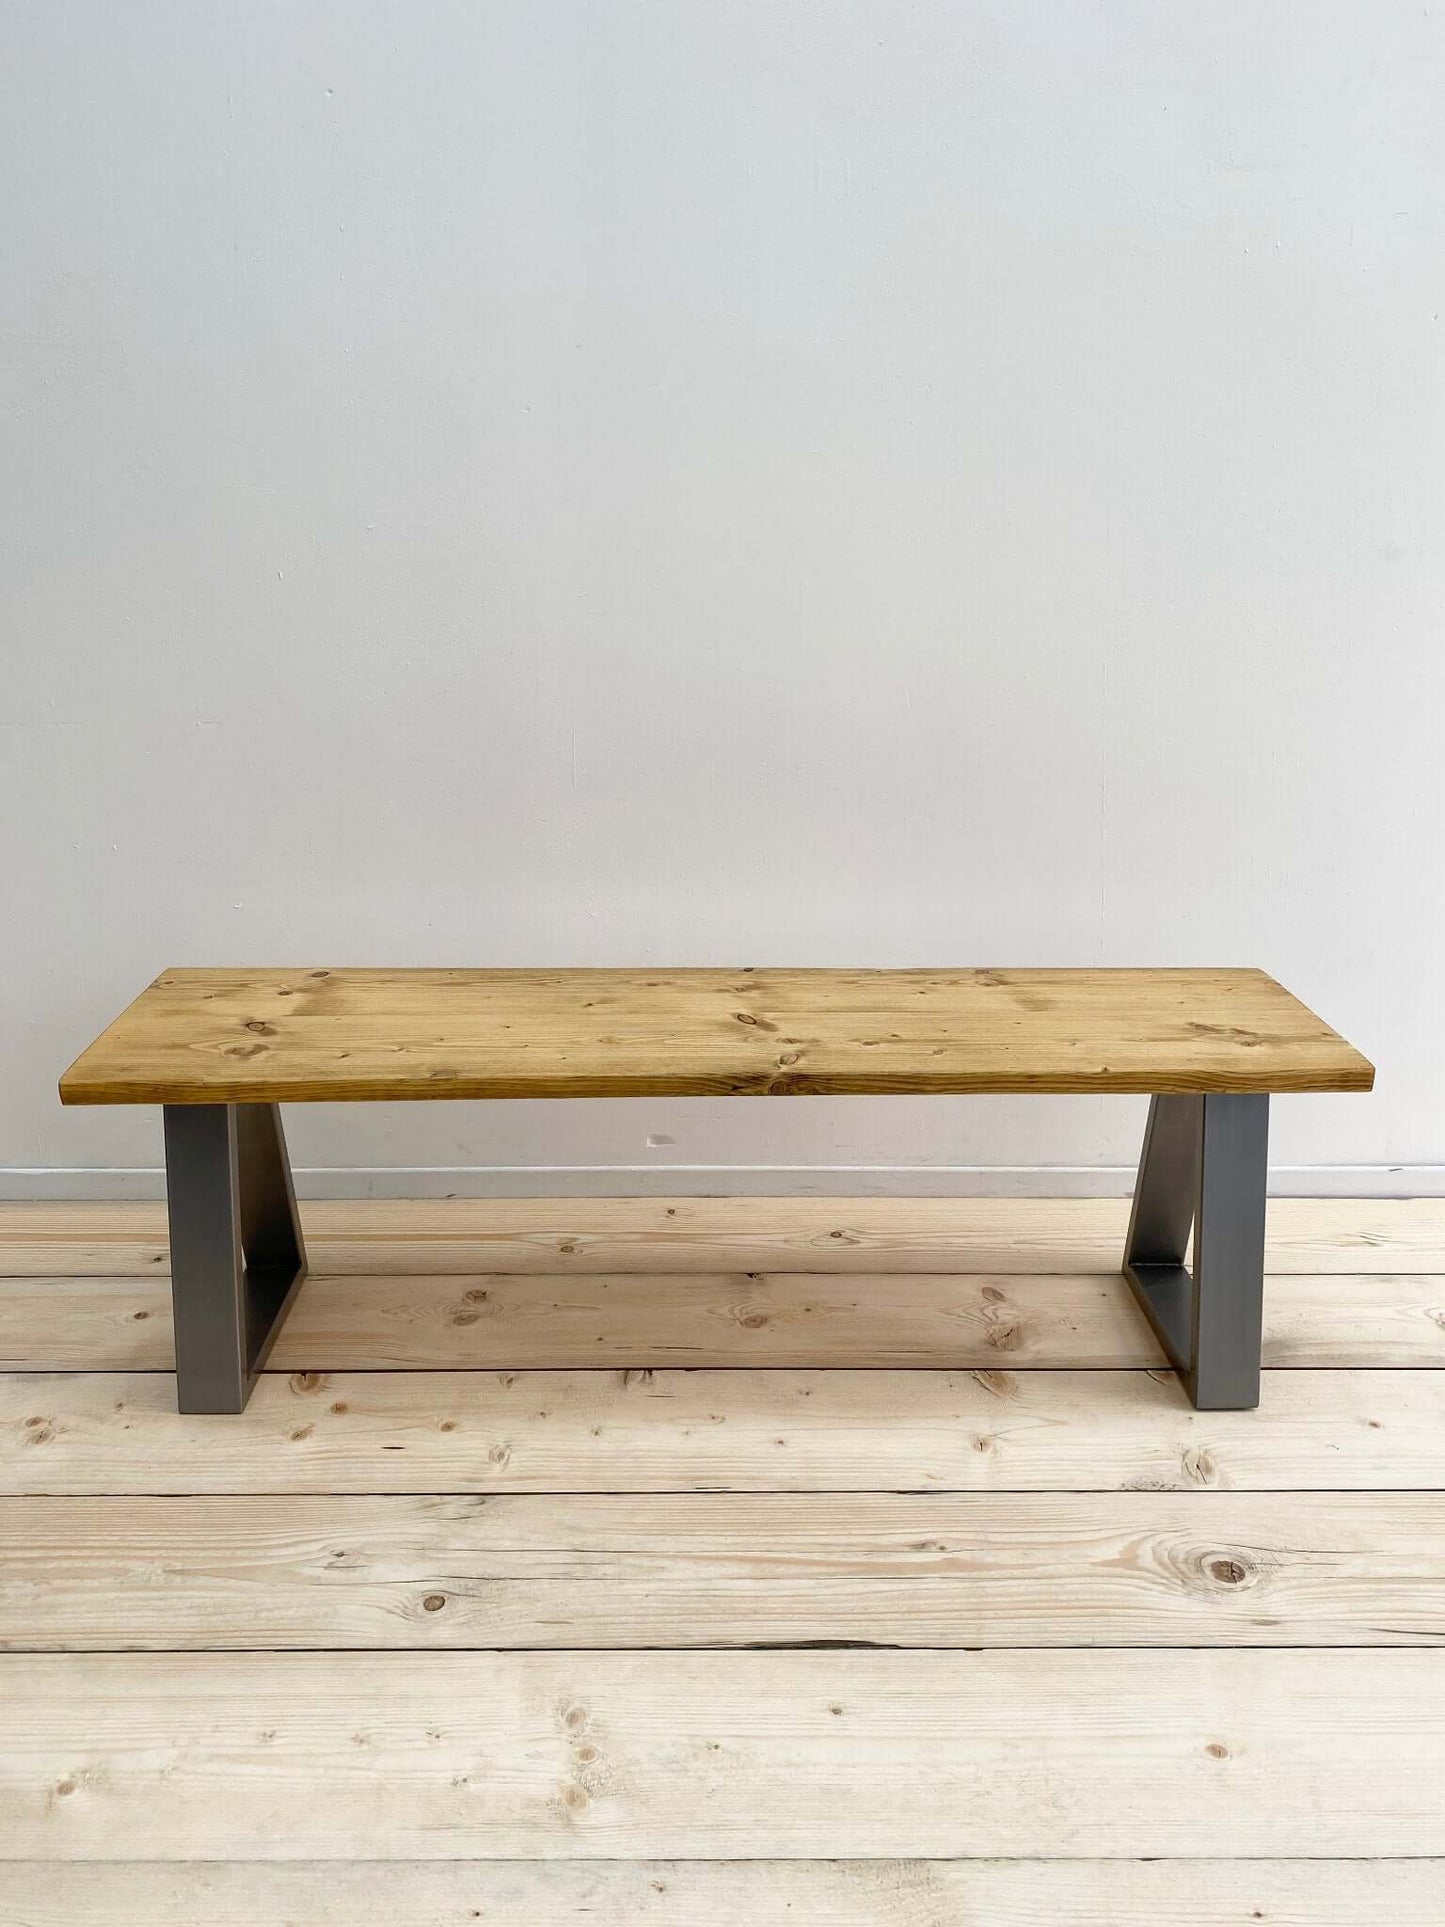 Reclaimed wood bench seat with industrial legs.